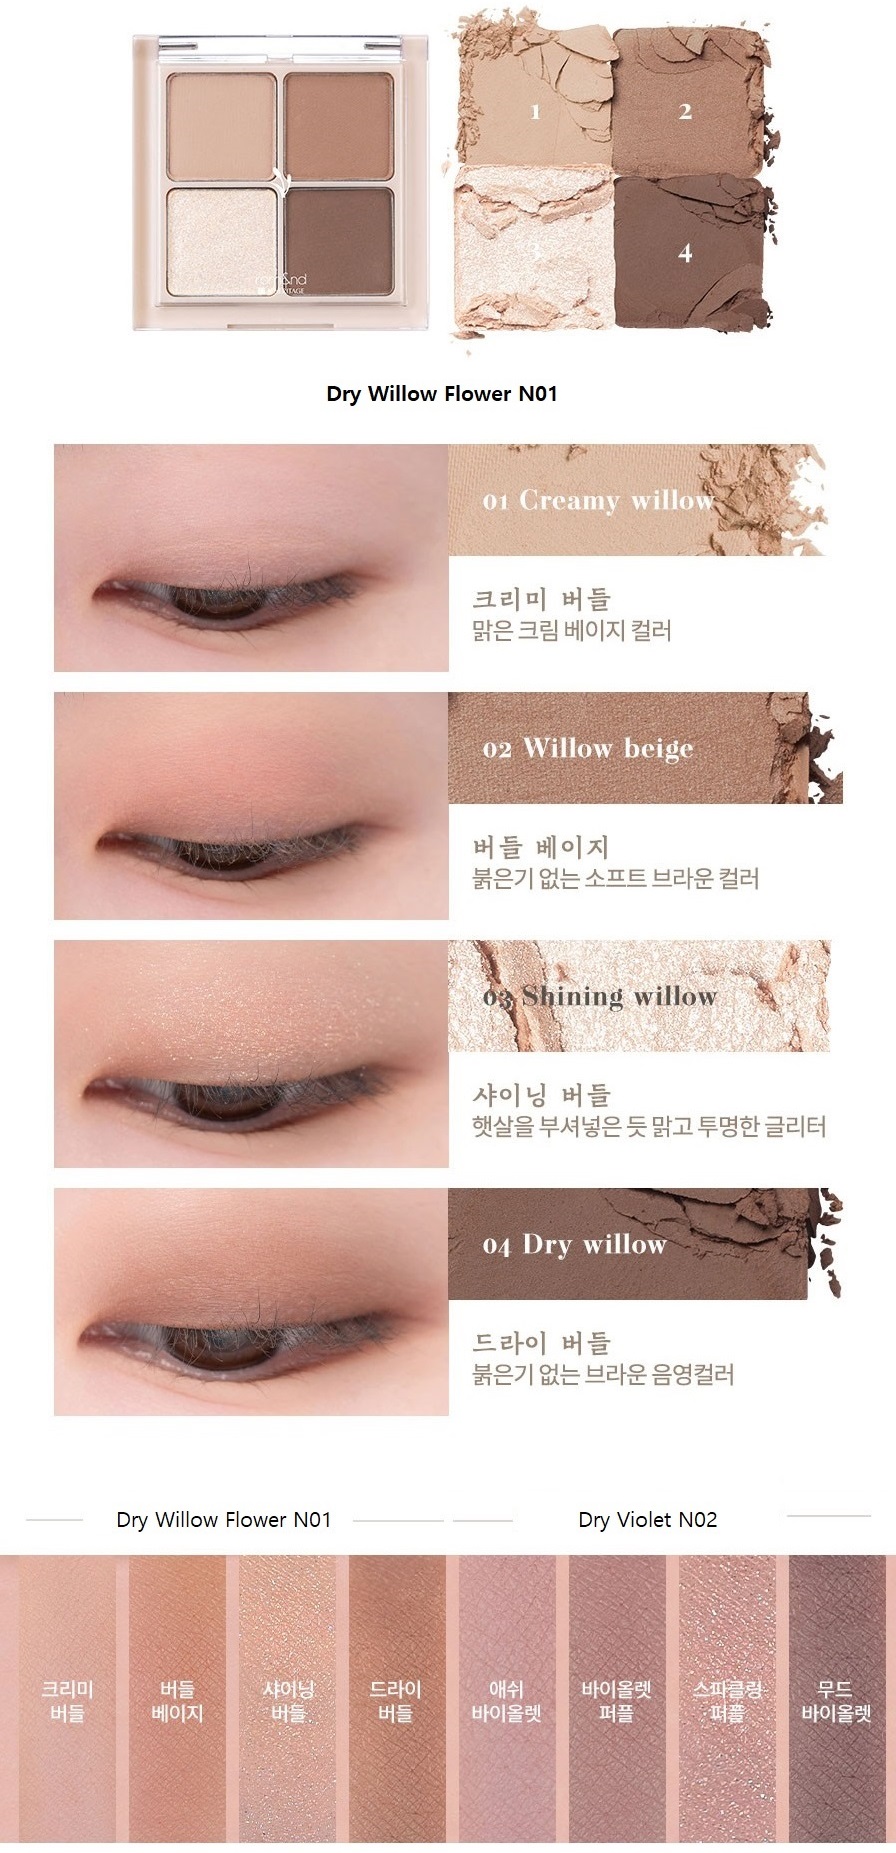 ROMAND Better Than Eyes Hanbok Project Dry Willow Flower N01 6g